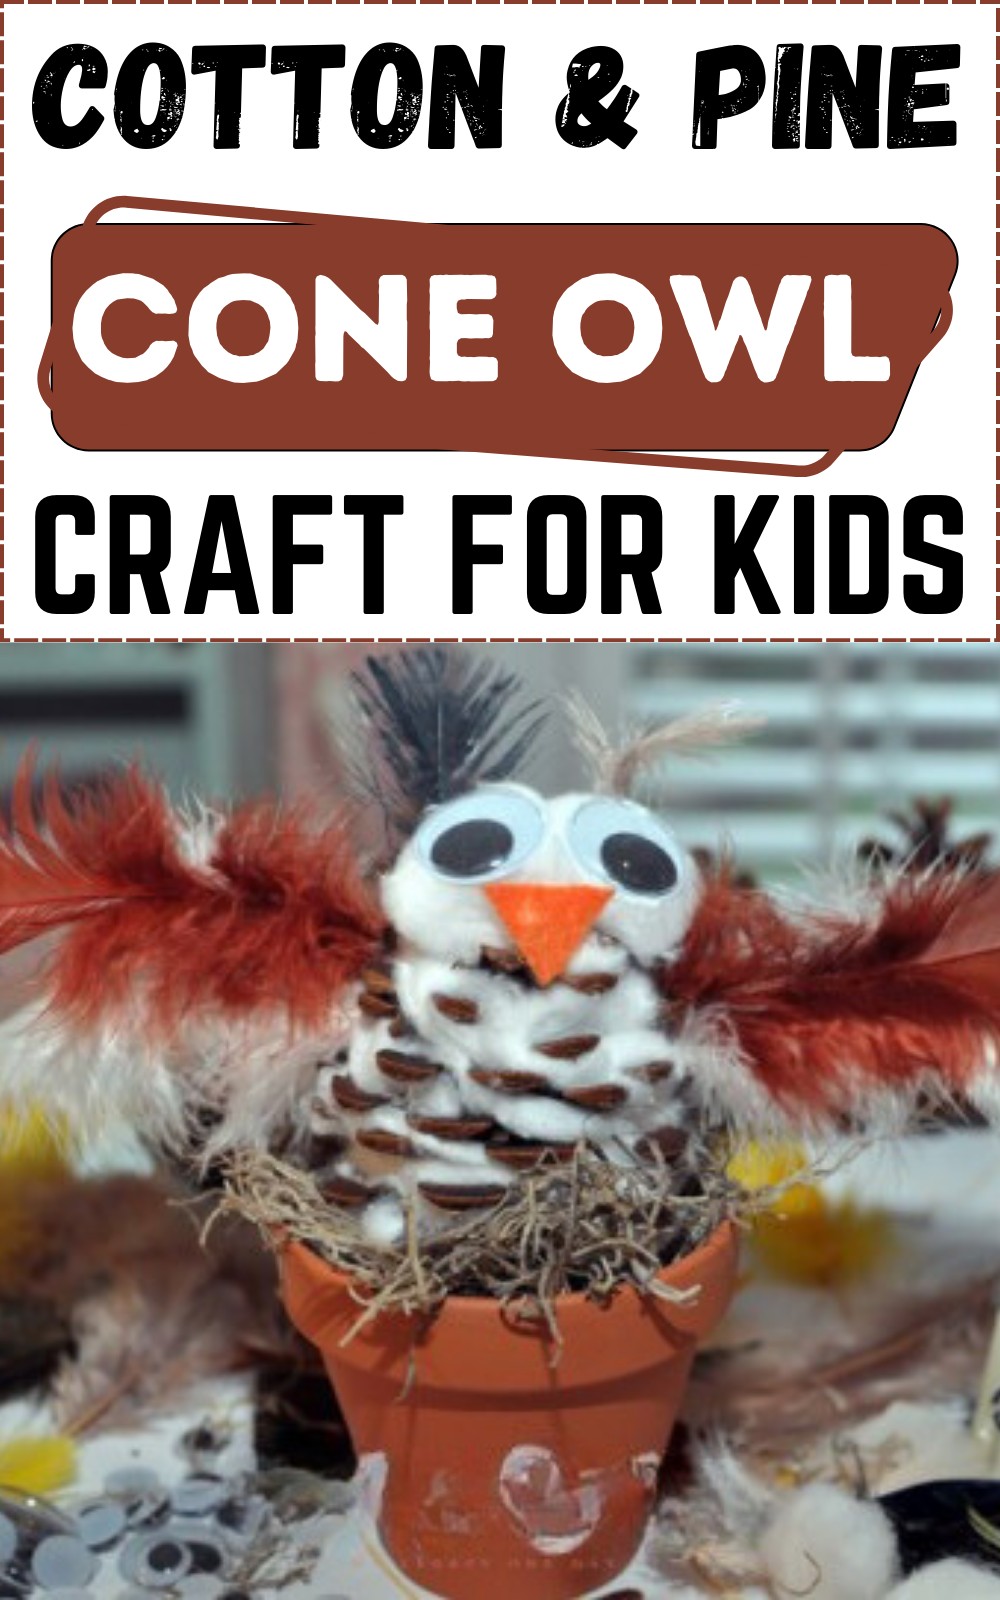 Cotton & Pine Cone Owl Craft For Kids